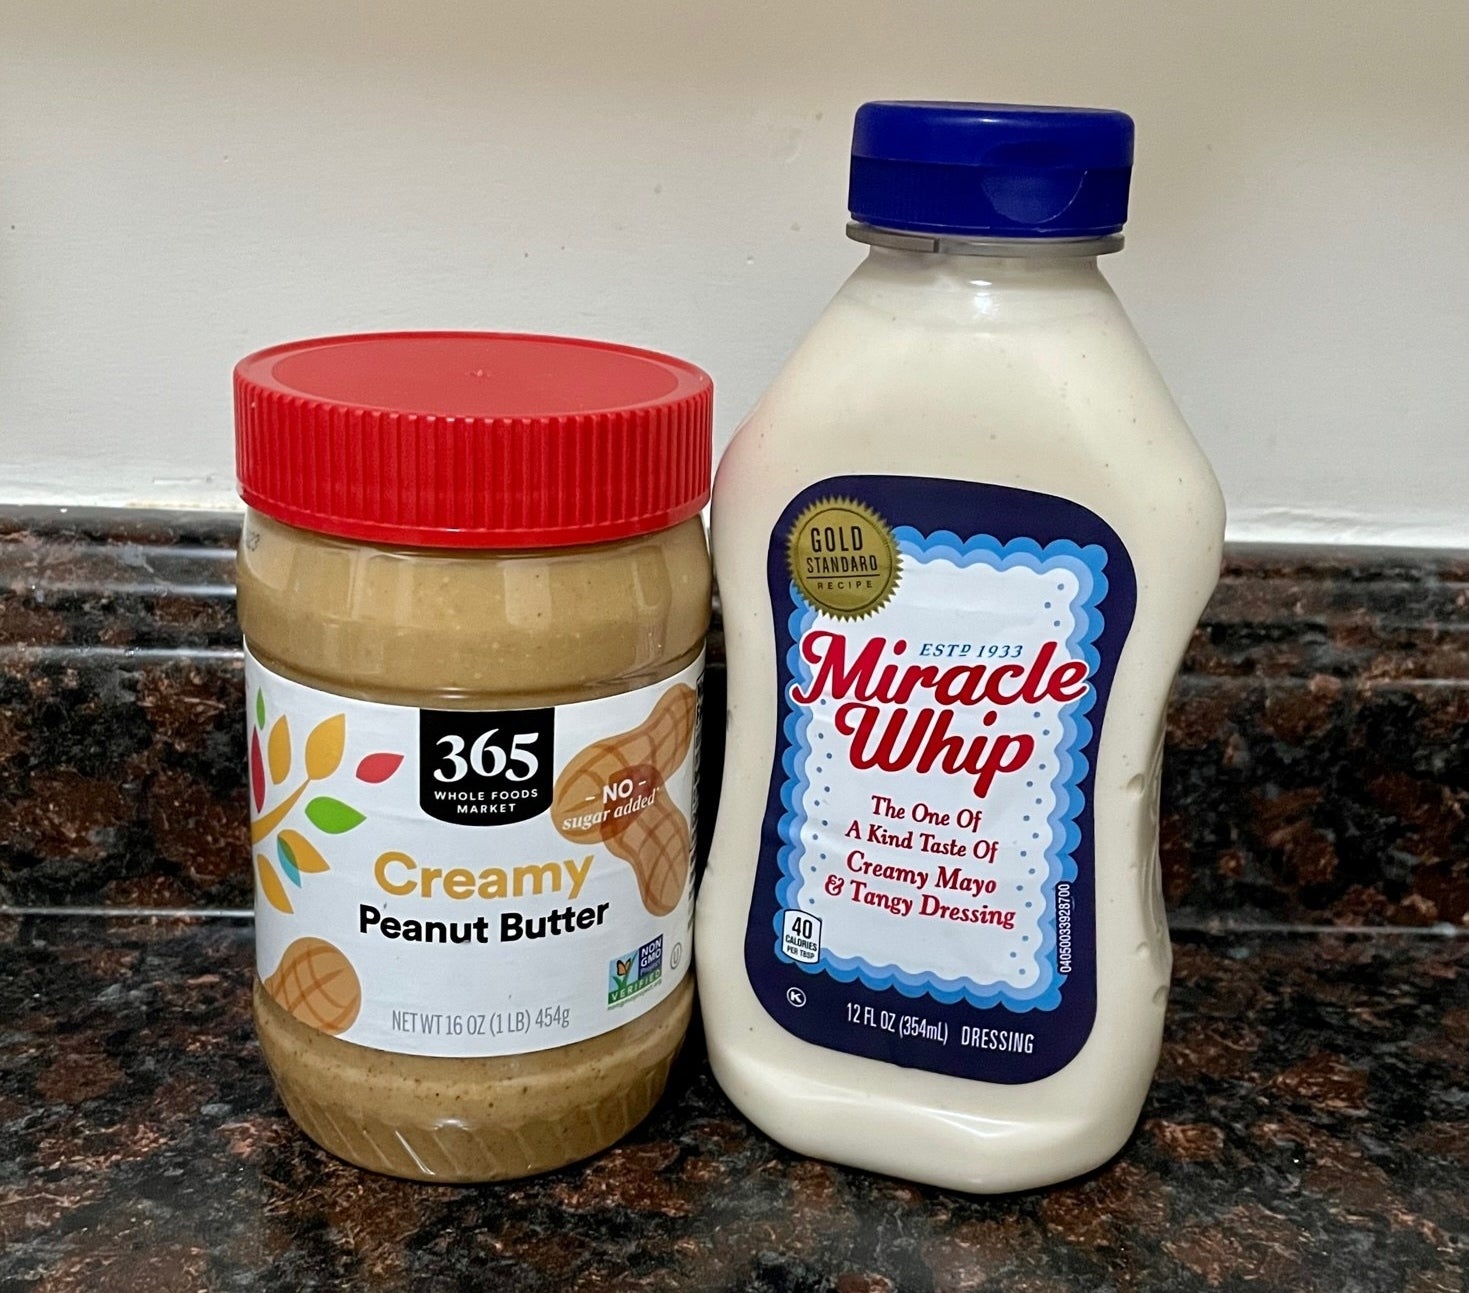 A jar of peanut butter and jar of mayo